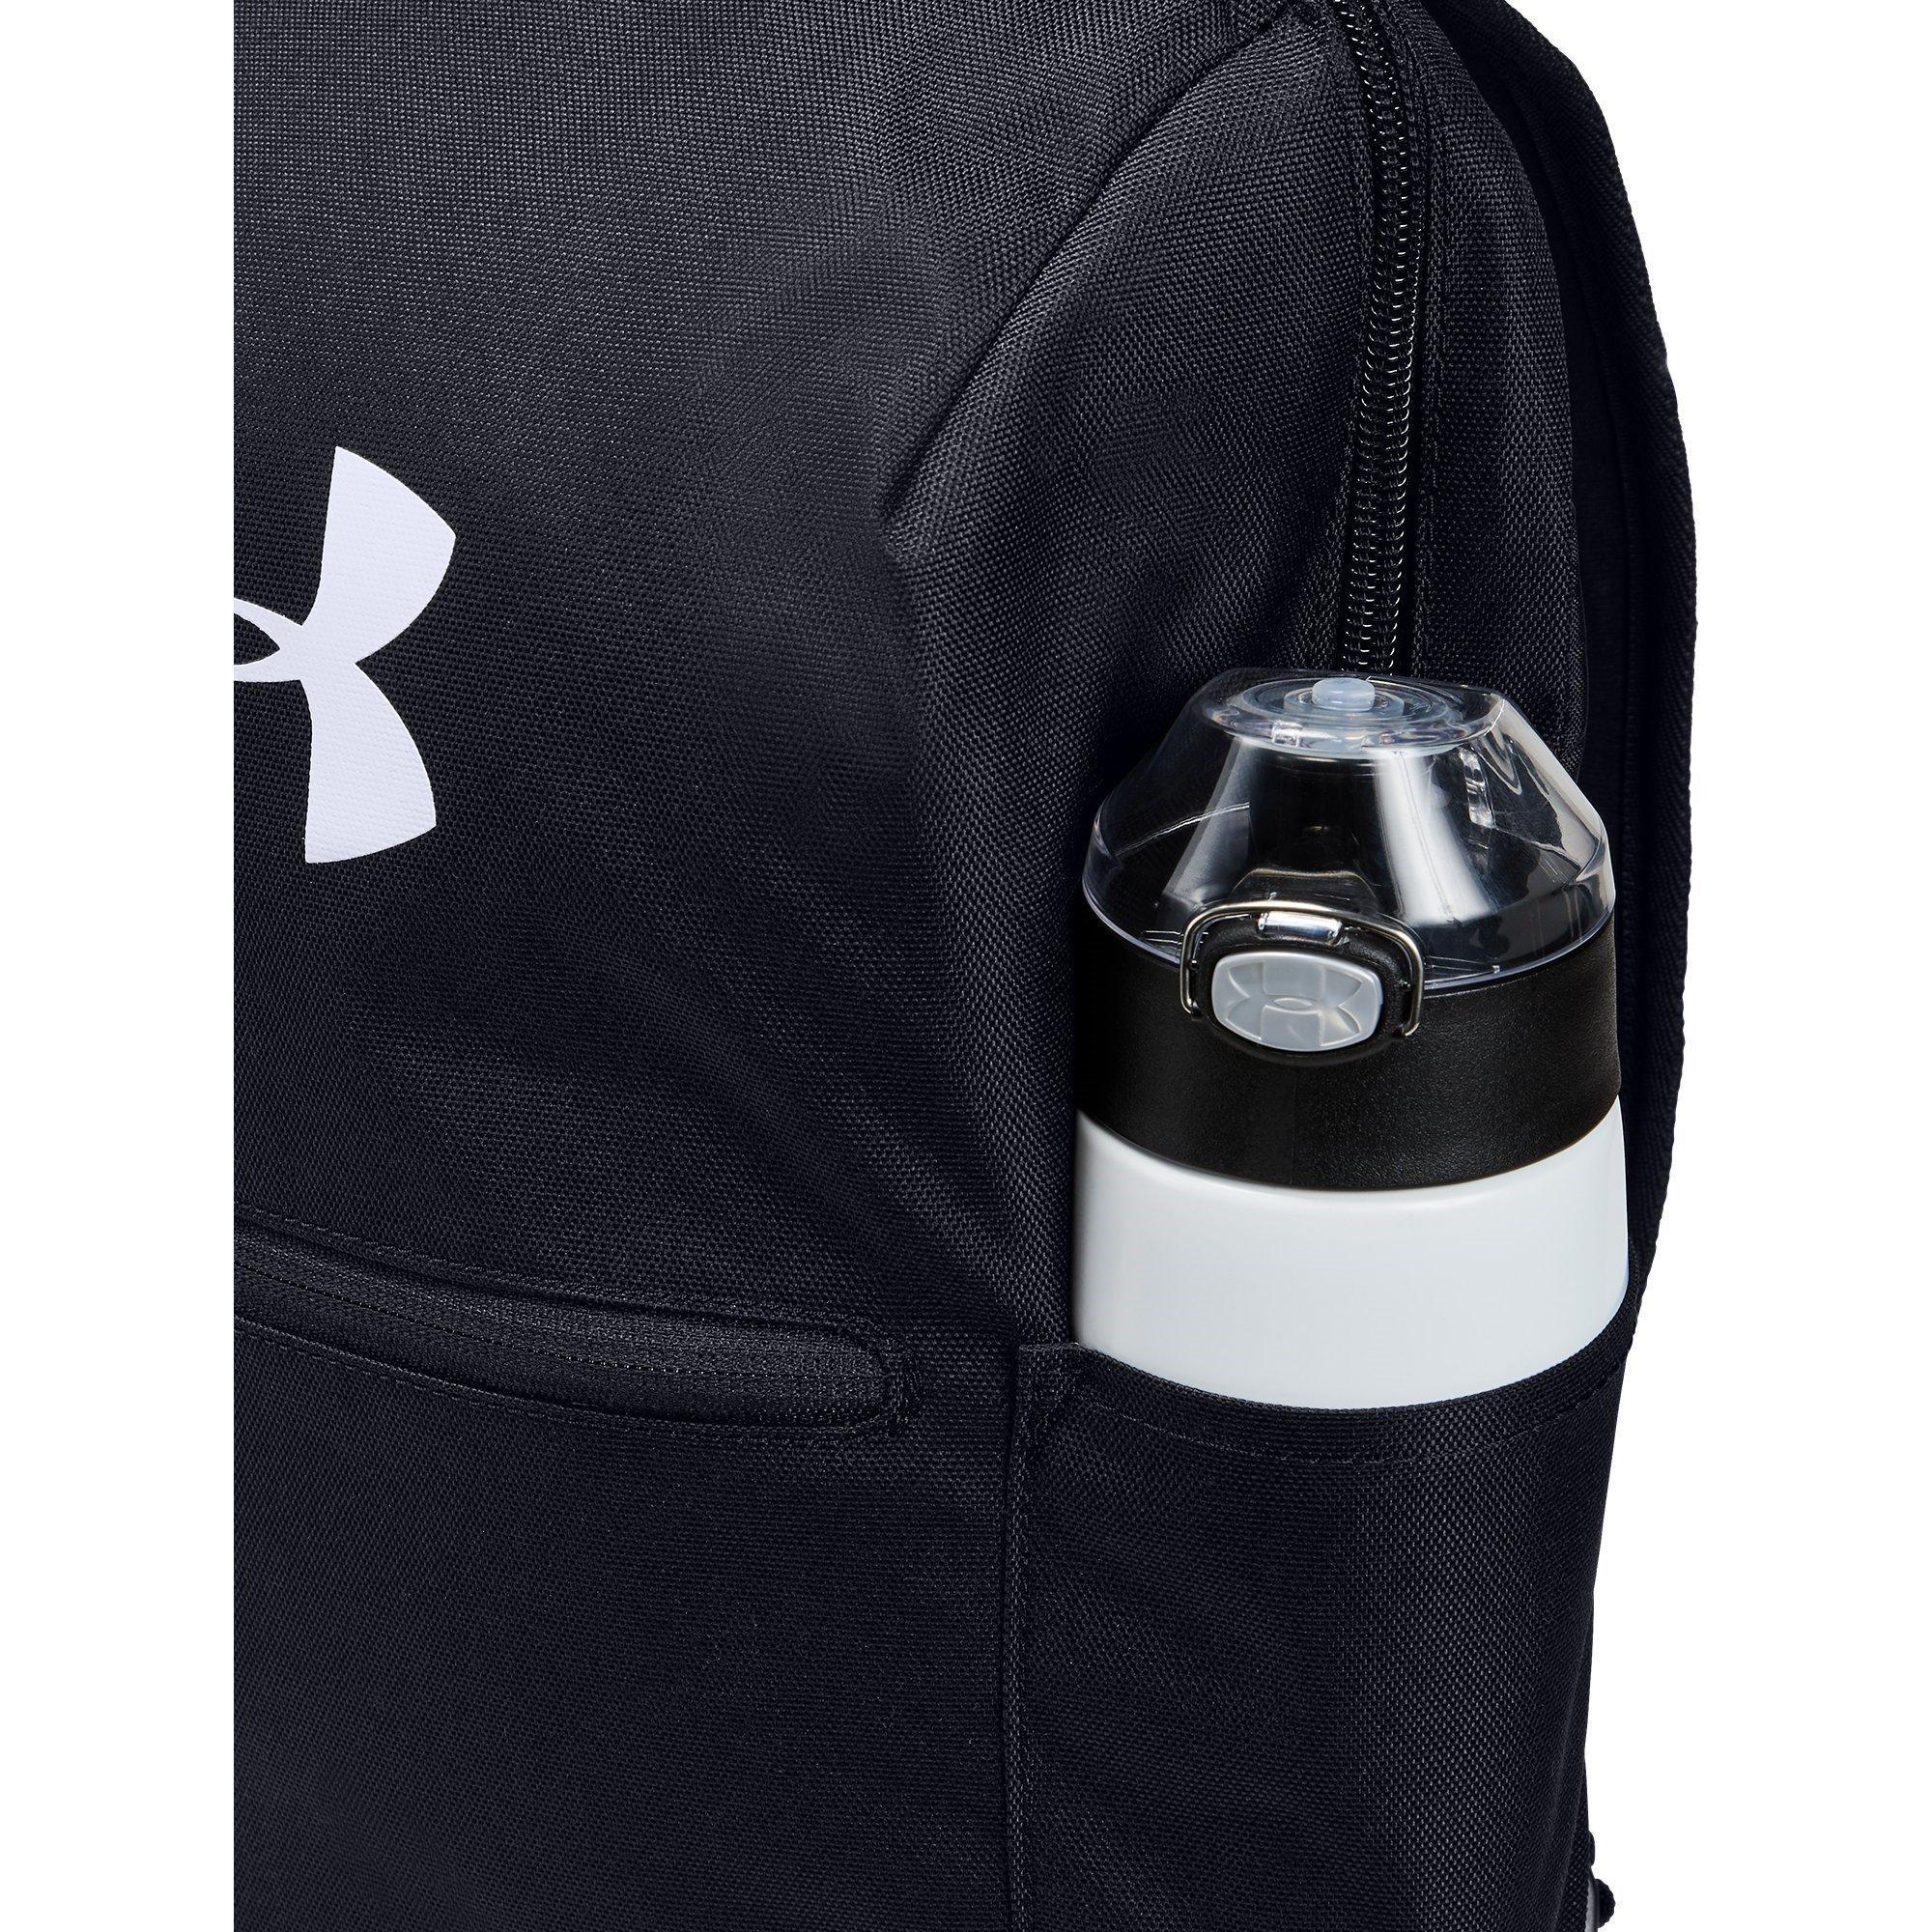 Under | Backpack Back Packs | Sports Direct MY